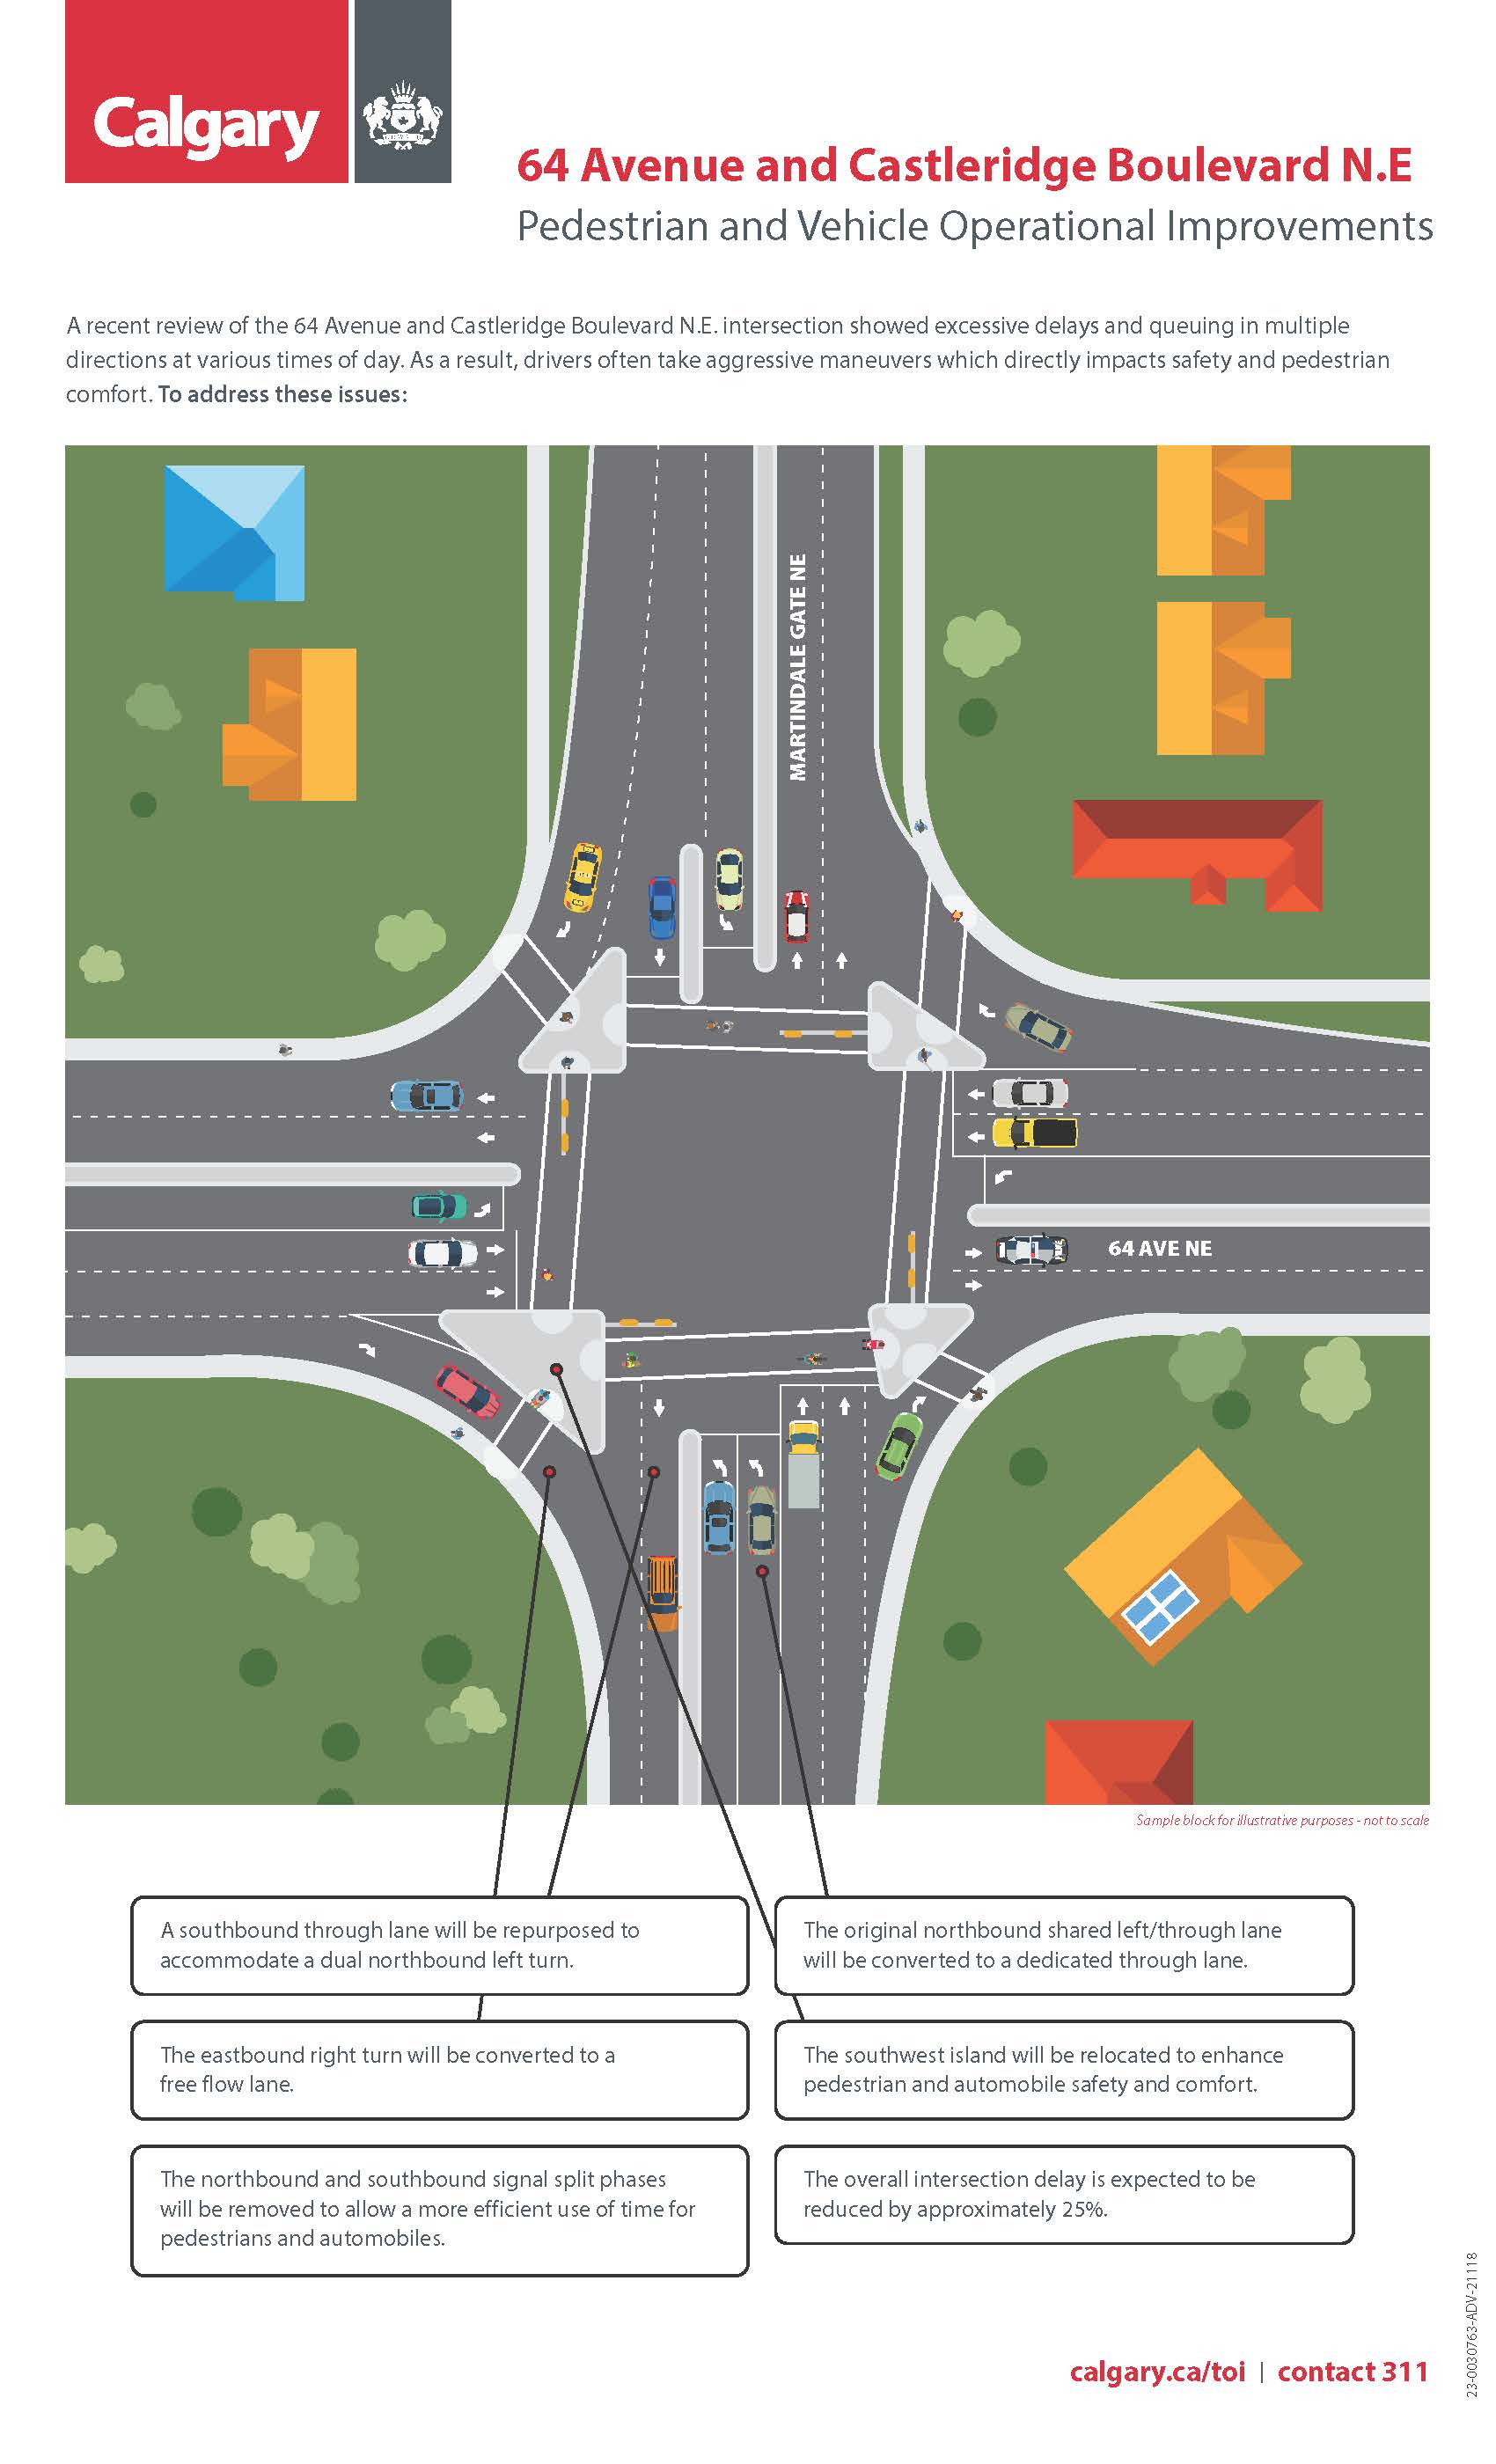 Improvements to Pedestrian and Vehicle operations at 64 Avenue and Castleridge Blvd.